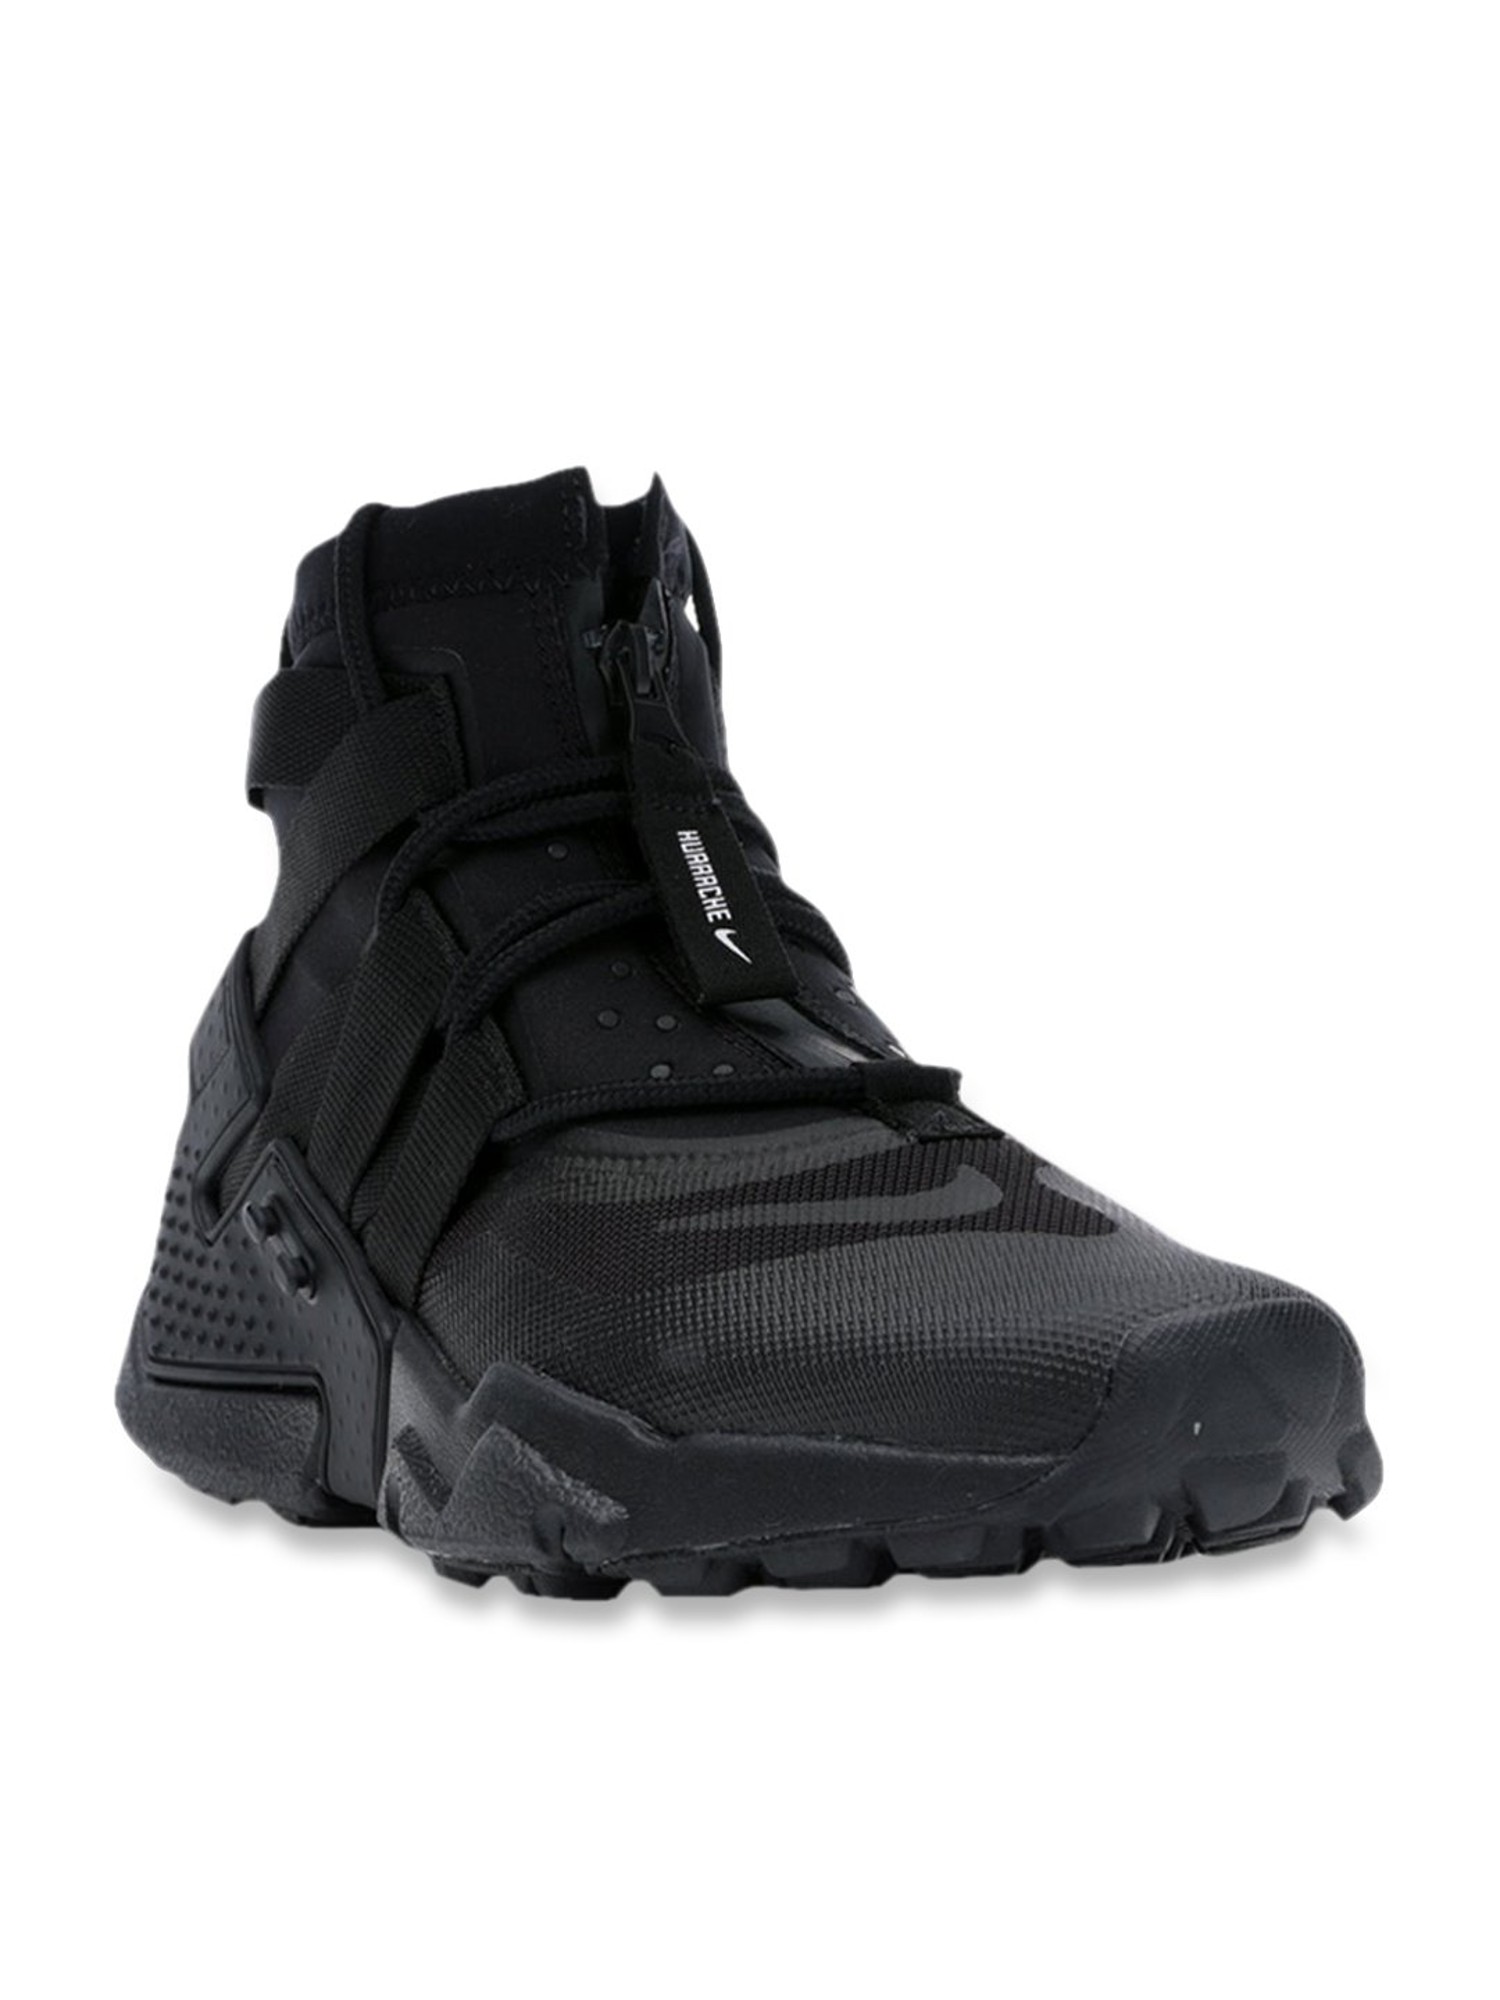 nike high ankle shoes black